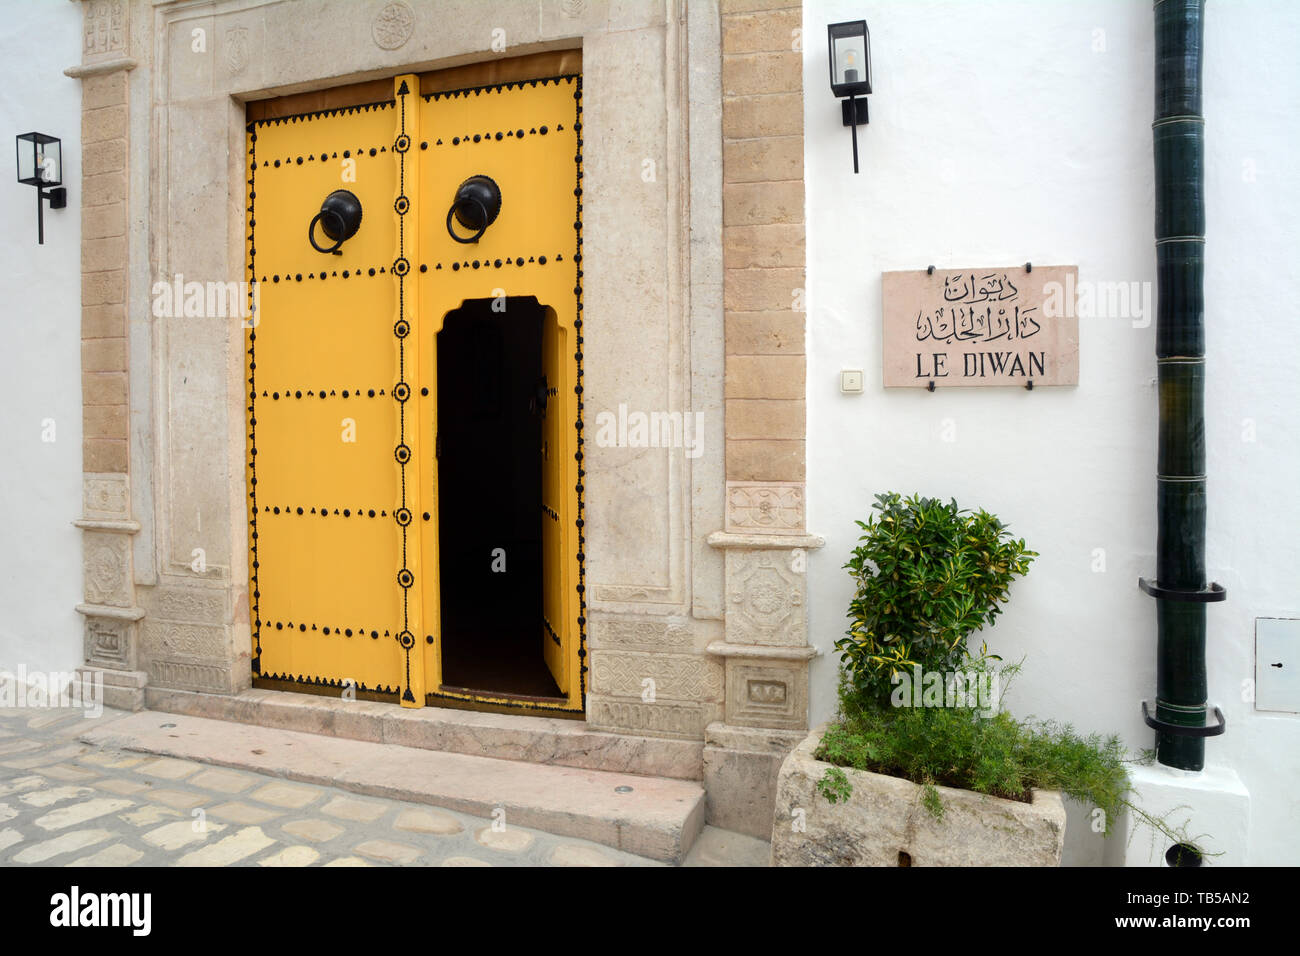 The traditional yellow door at an upscale restaurant in a16th century building in an alleyway of the medina (old city) of Tunis, Tunisia. Stock Photo